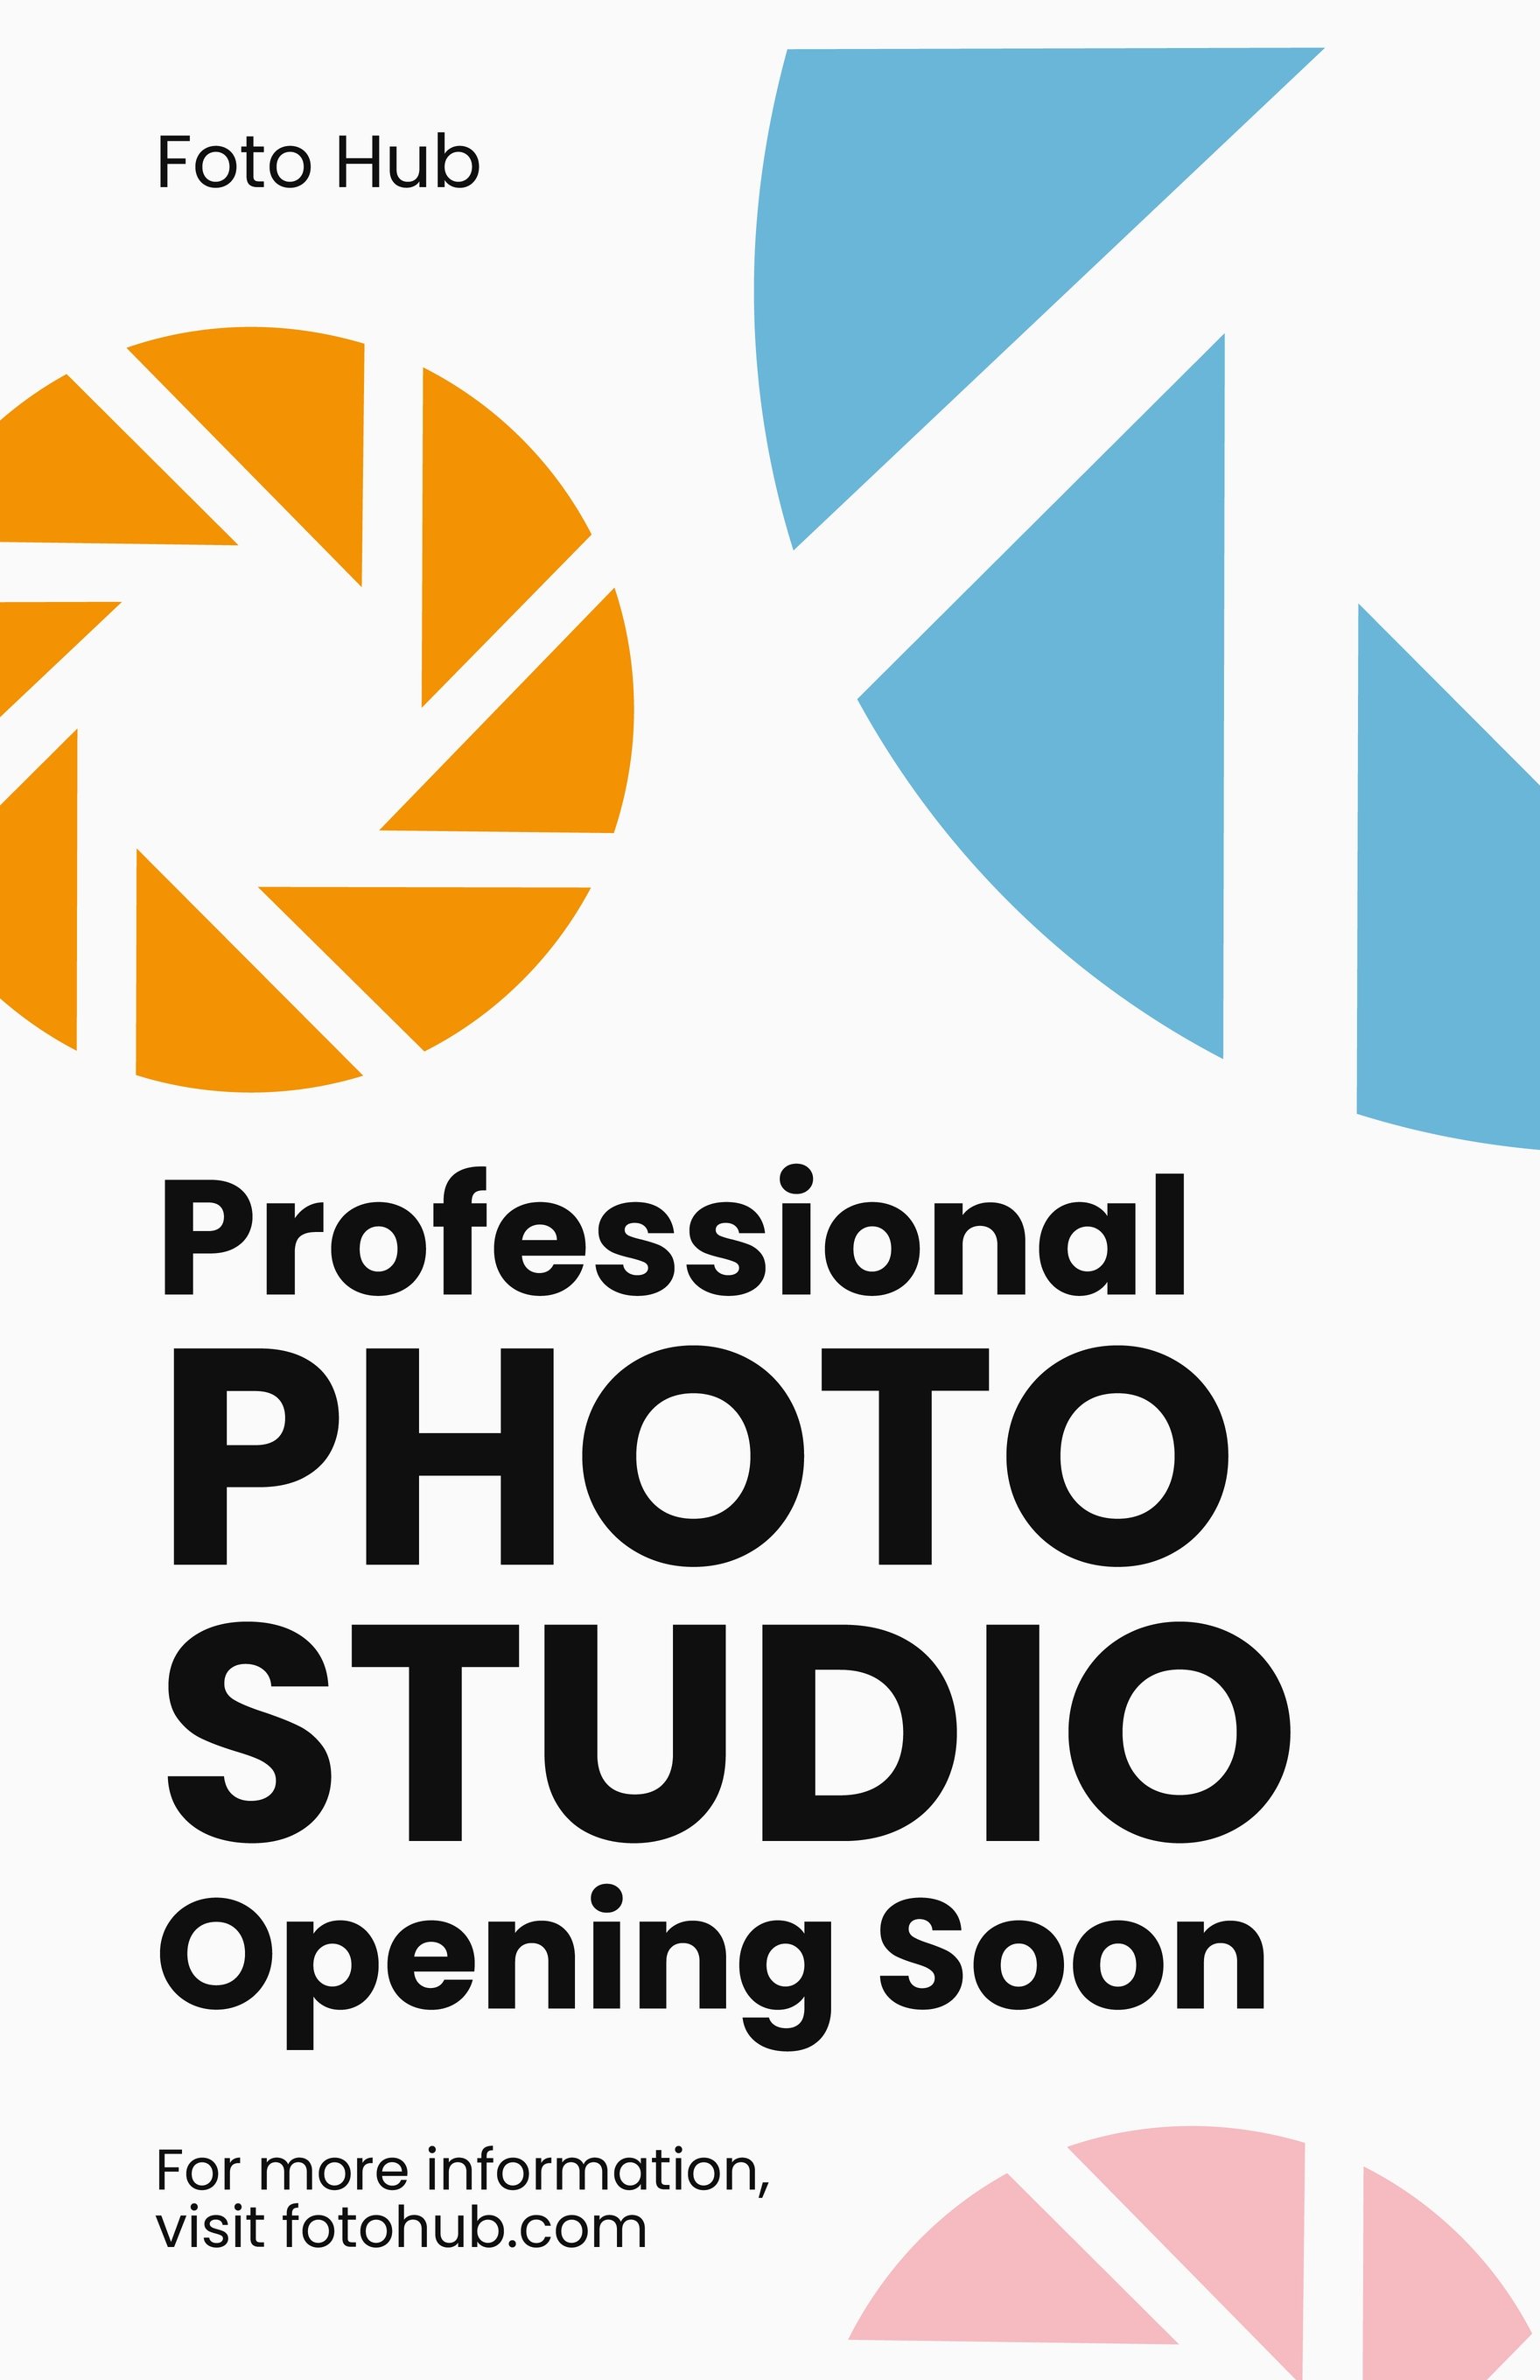 Studio Coming Soon Poster in Word, Google Docs, Illustrator, PSD, Apple Pages, Publisher